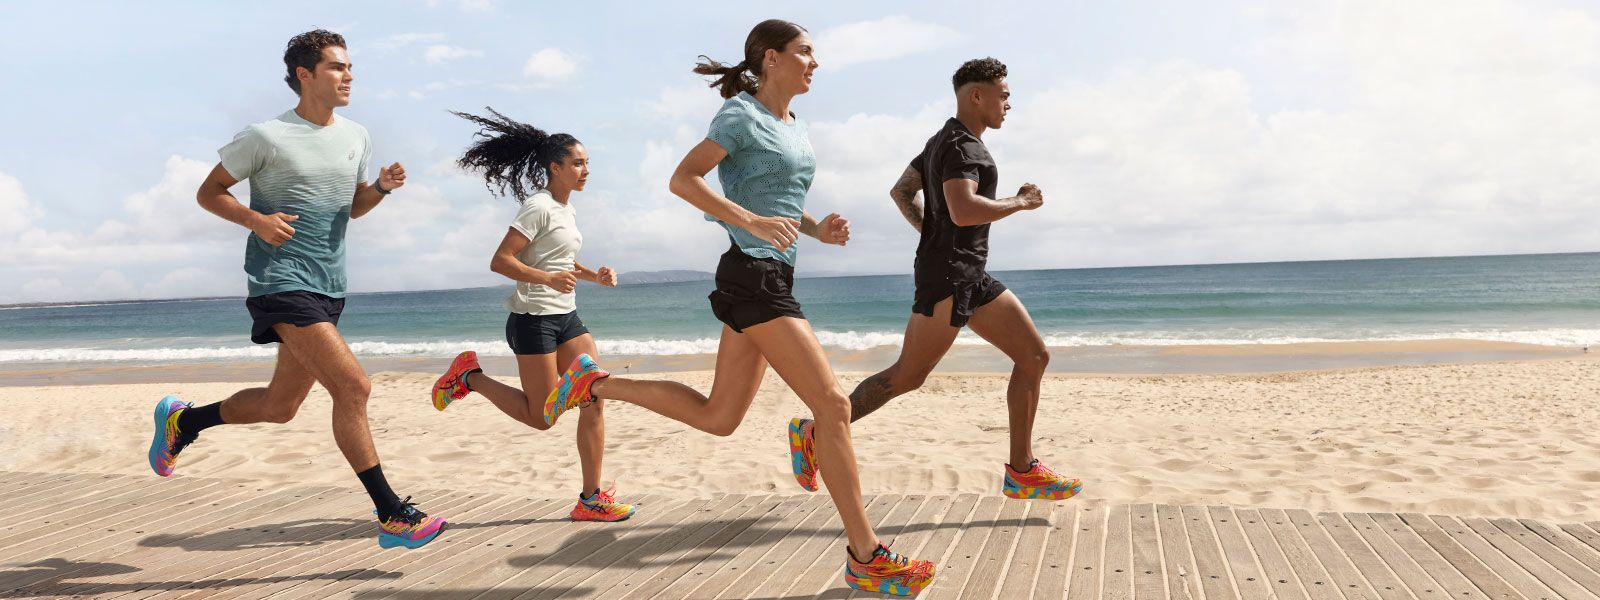 Group of people running together on a beach boardwalk.